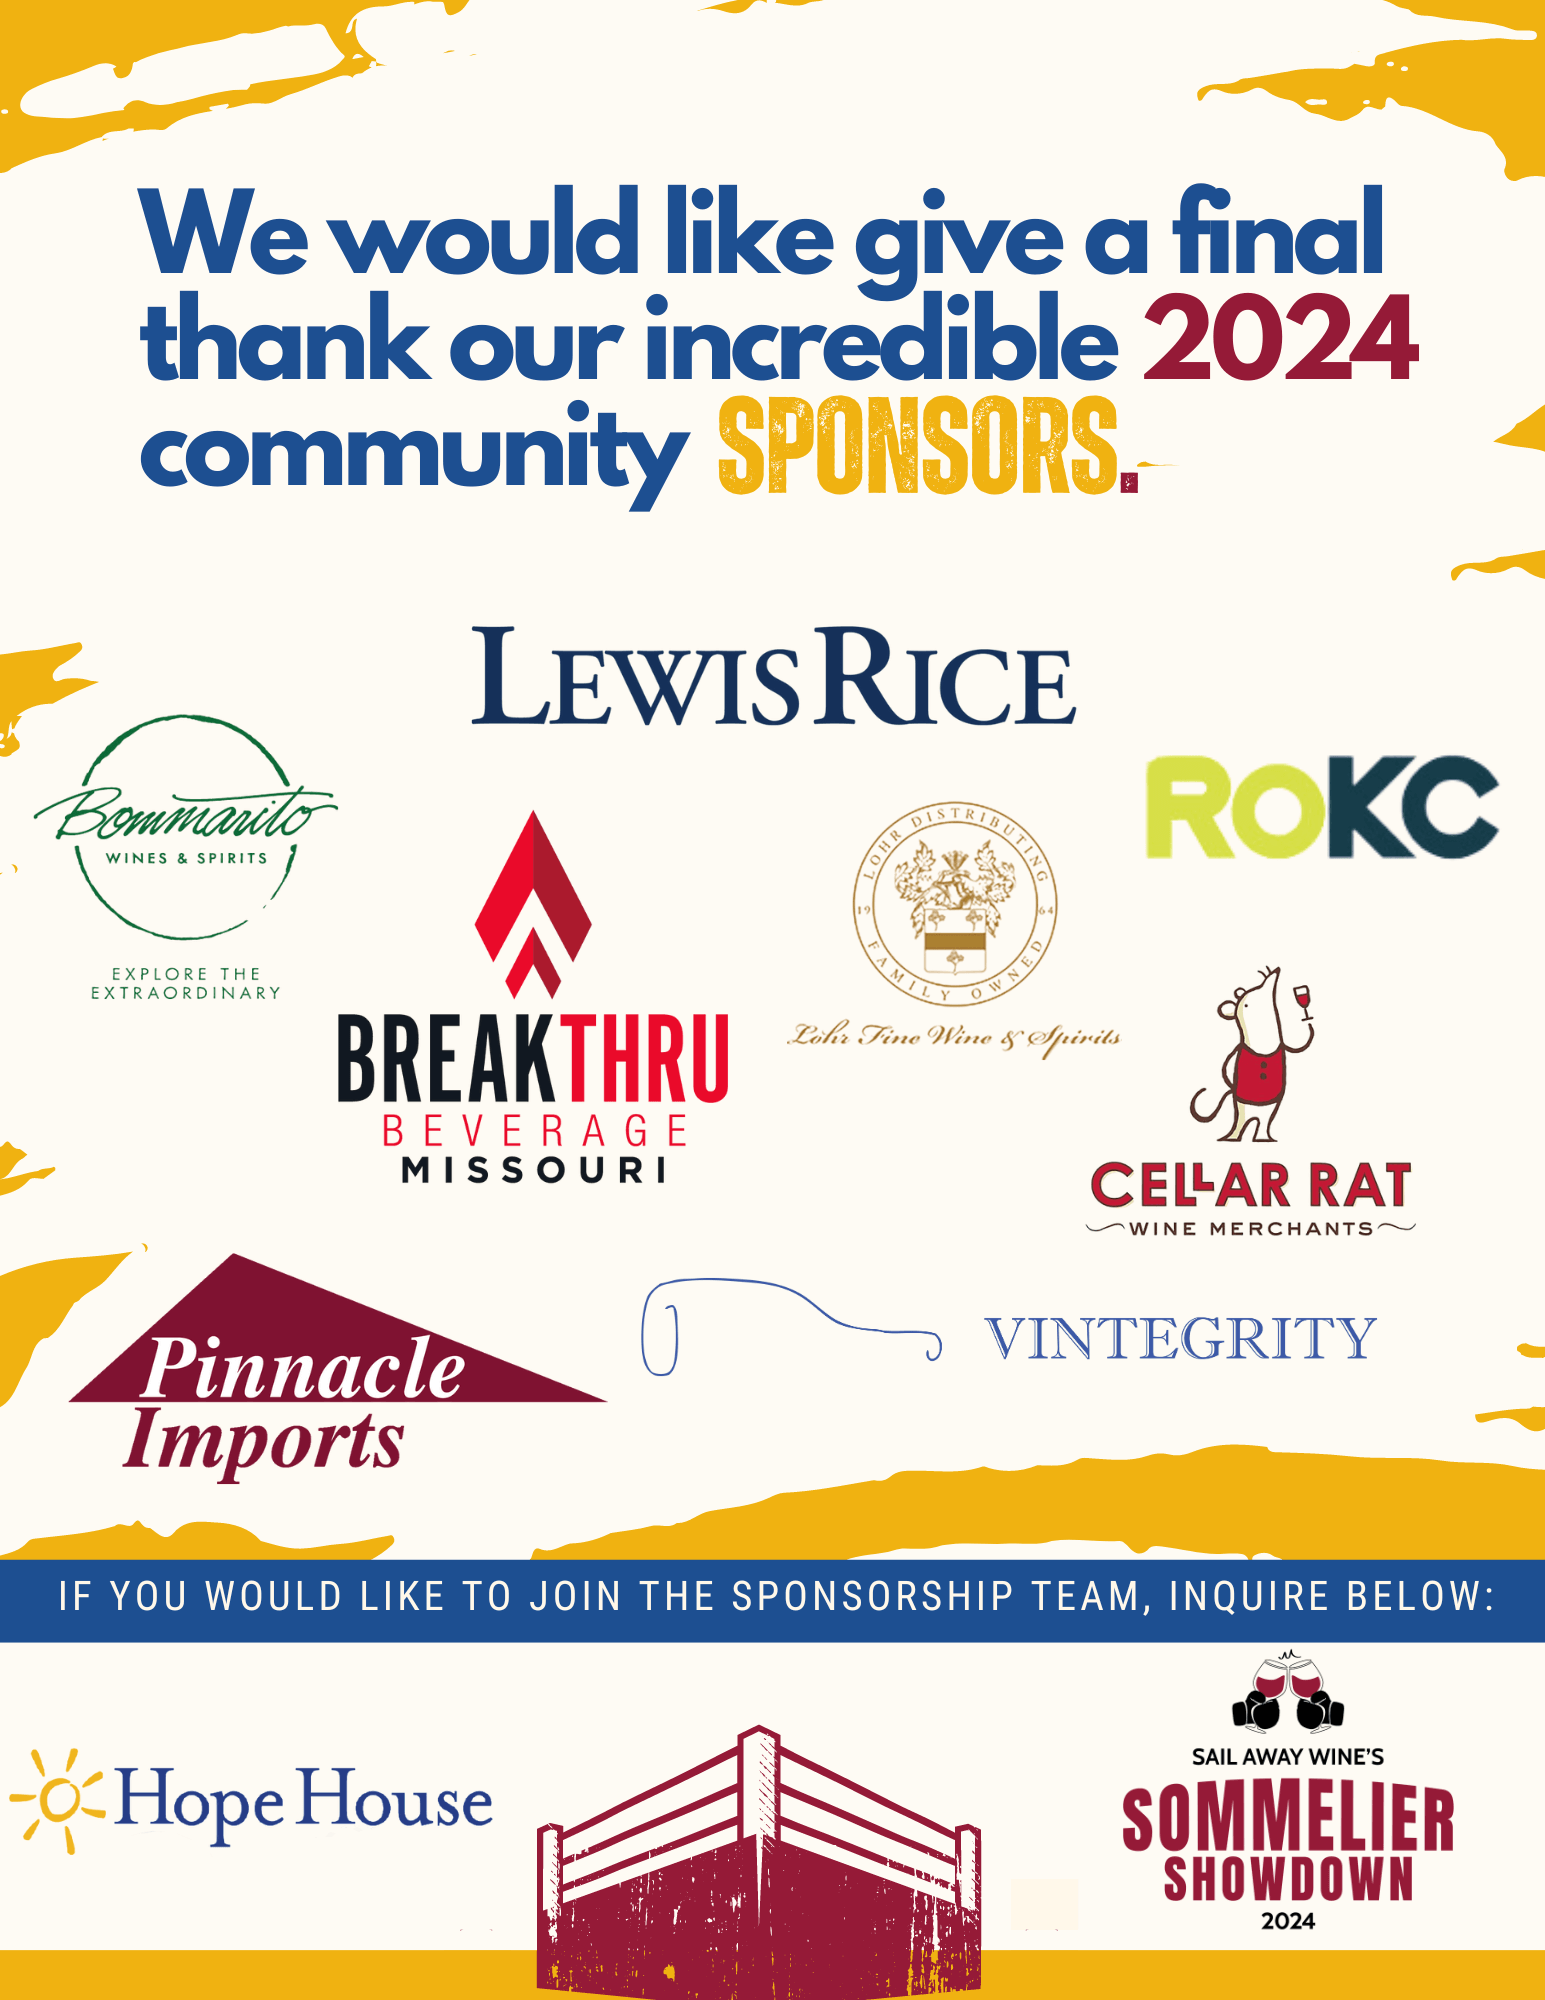 This is a flier showcasing our 2024 Sommelier Showdown community sponsors. We would like to thank Lewis Rice LLC, KSHB 41 Kansas City, RoKC, Bommarito Wines, Breakthru Beverage Missouri, Cellar Rat Wine Merchants, Pinnacle Imports, and Vintegrity Wine & Spirits. All funds raised benefit Hope House